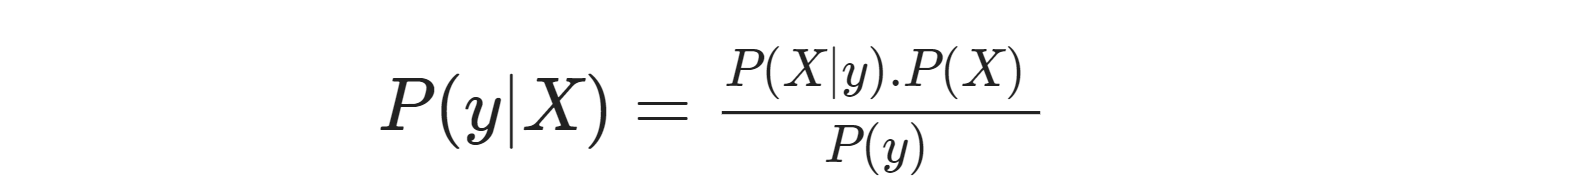 gaussian naive bayes theorem as conditional probability 